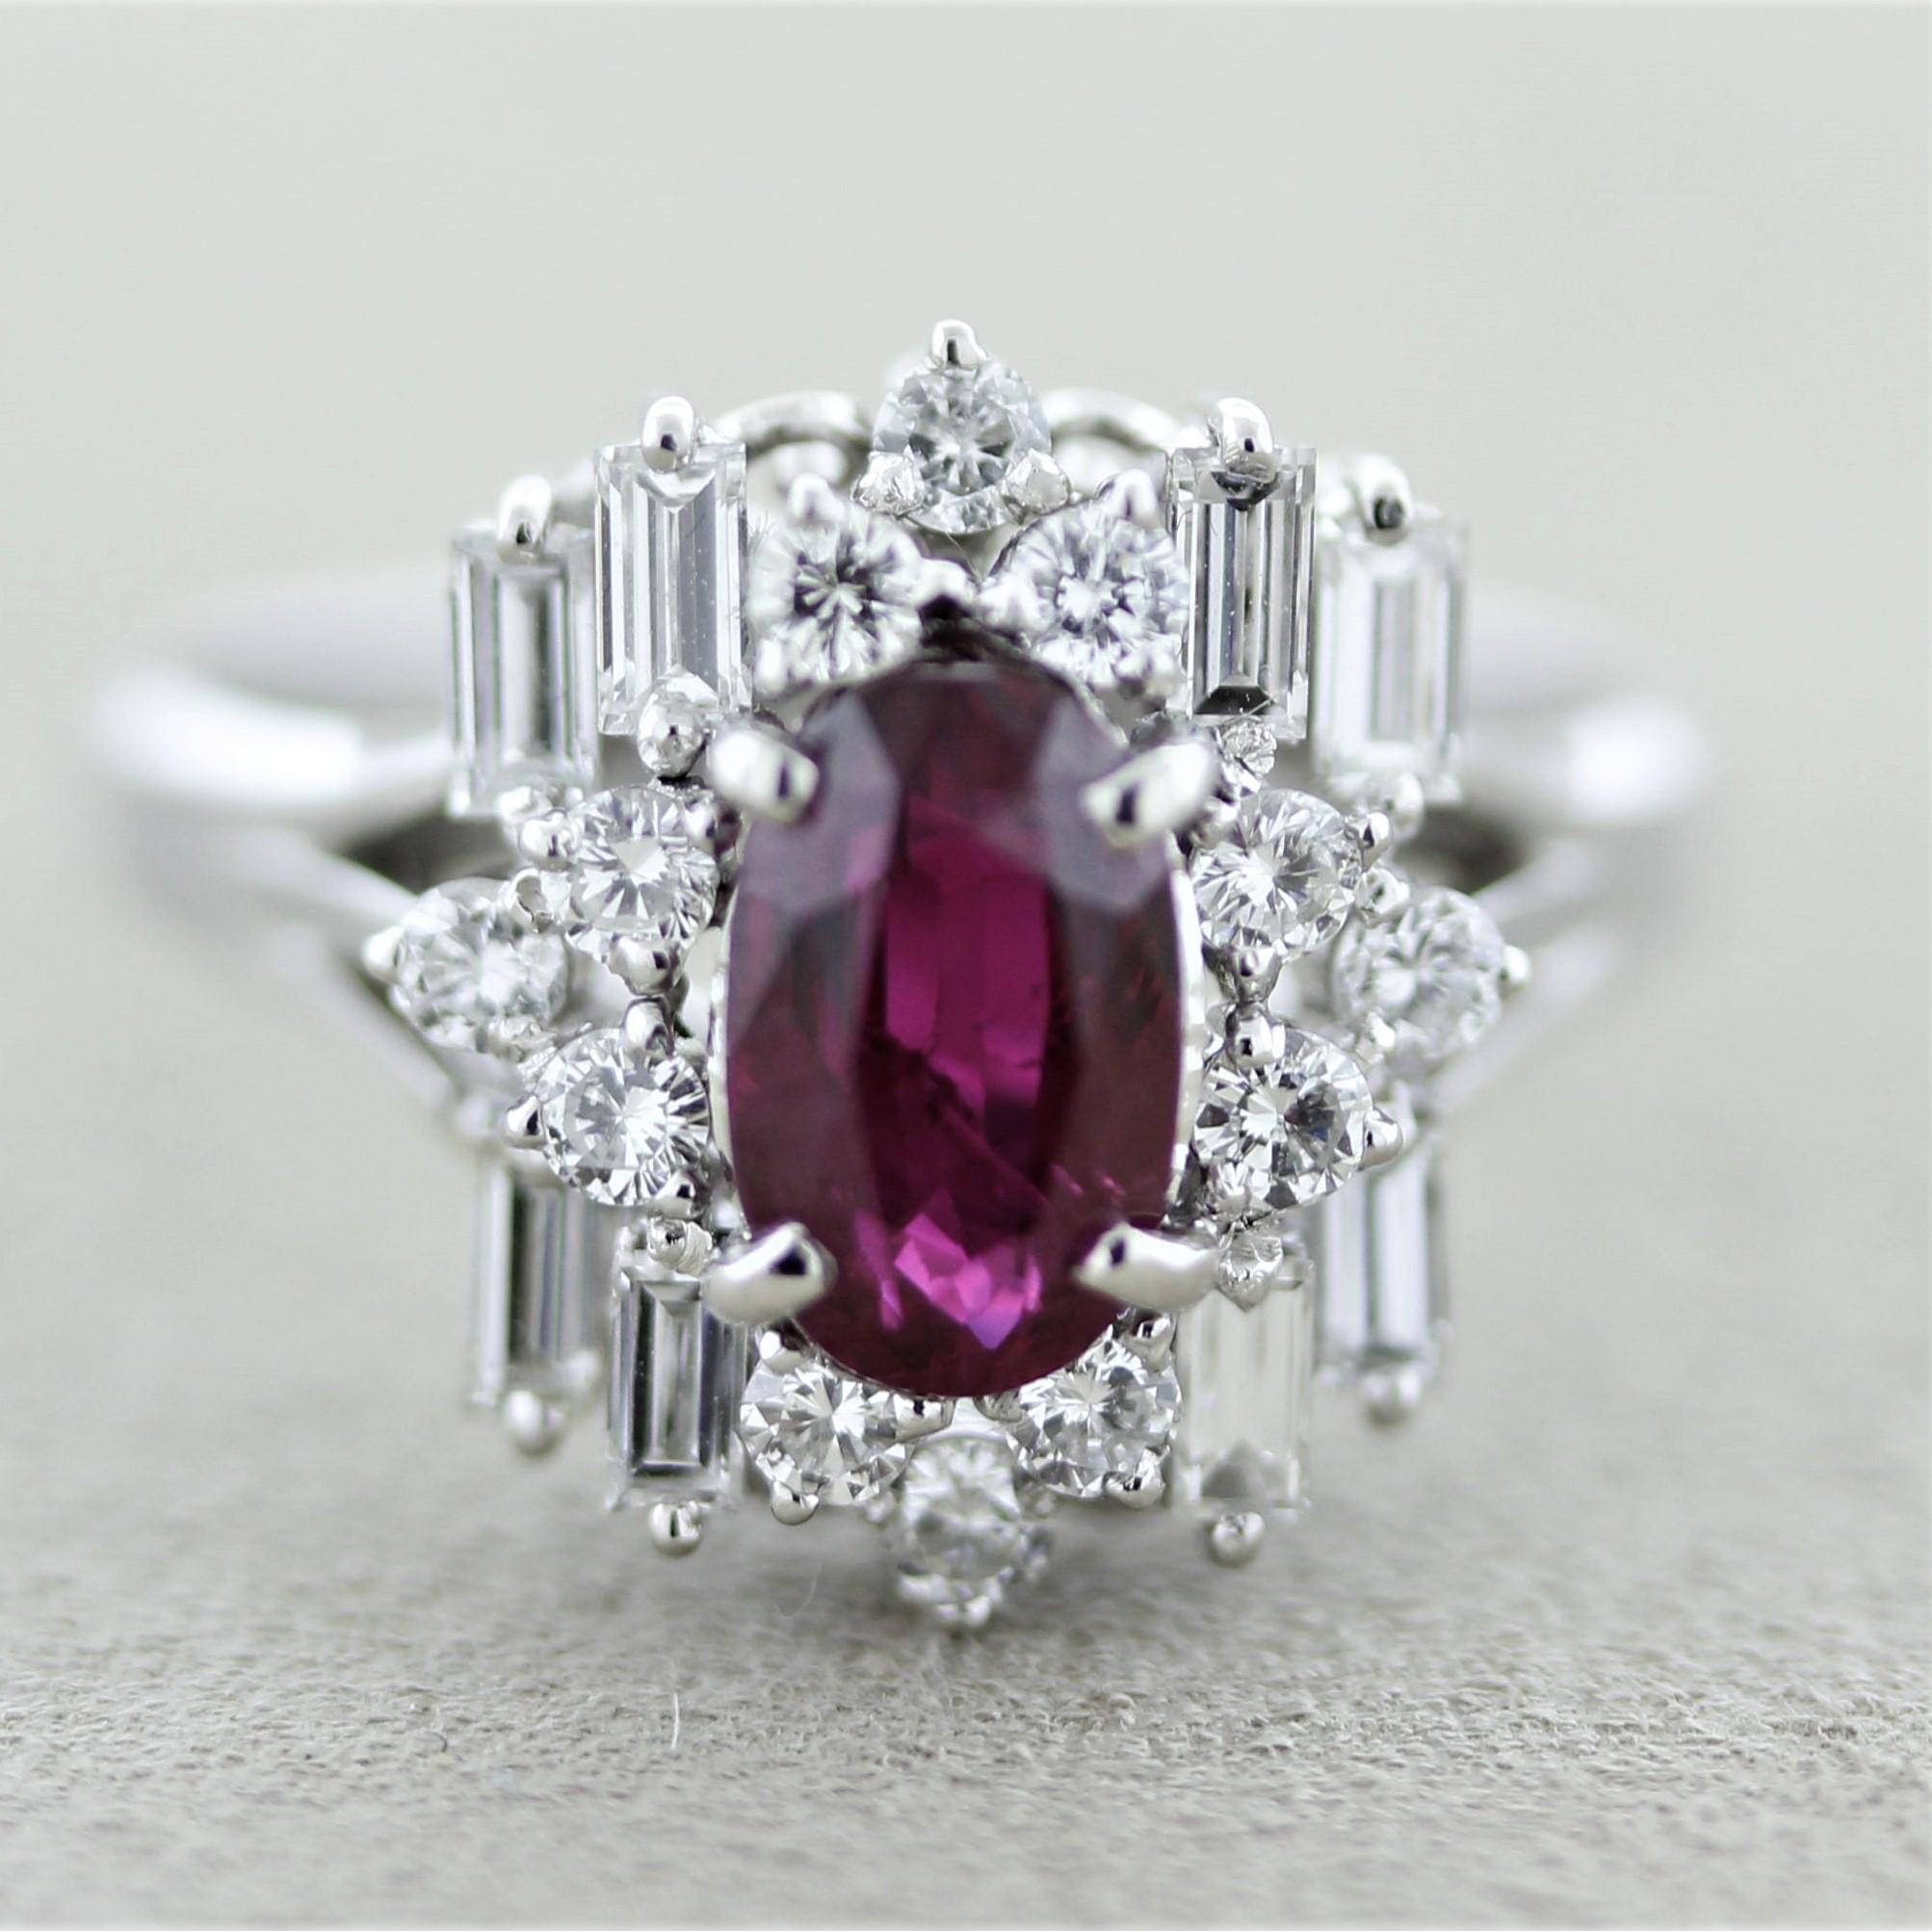 A stylish ring featuring fine gems. The oval-shape ruby weighs 1.55 carats and has a great rich royal red color. It is complemented by 0.88 carats of round brilliant and large baguette-cut diamonds set around the ruby in a unique geometric pattern.